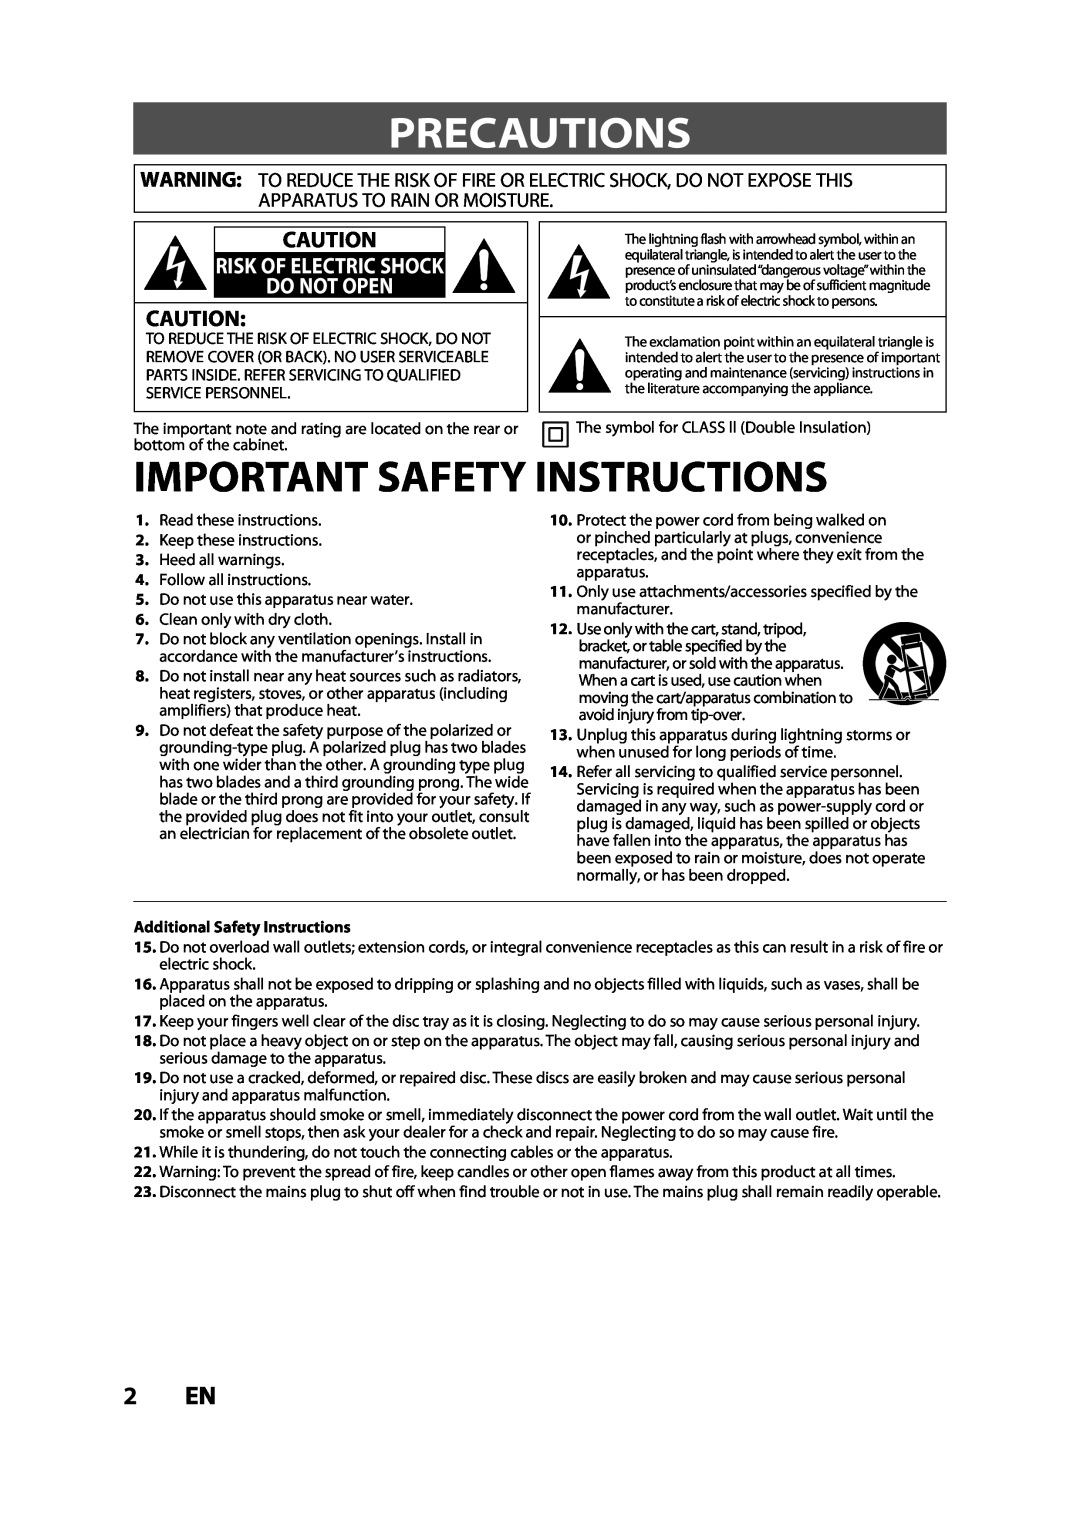 Toshiba DVR620KC owner manual Precautions, 2 EN, Additional Safety Instructions, Important Safety Instructions 